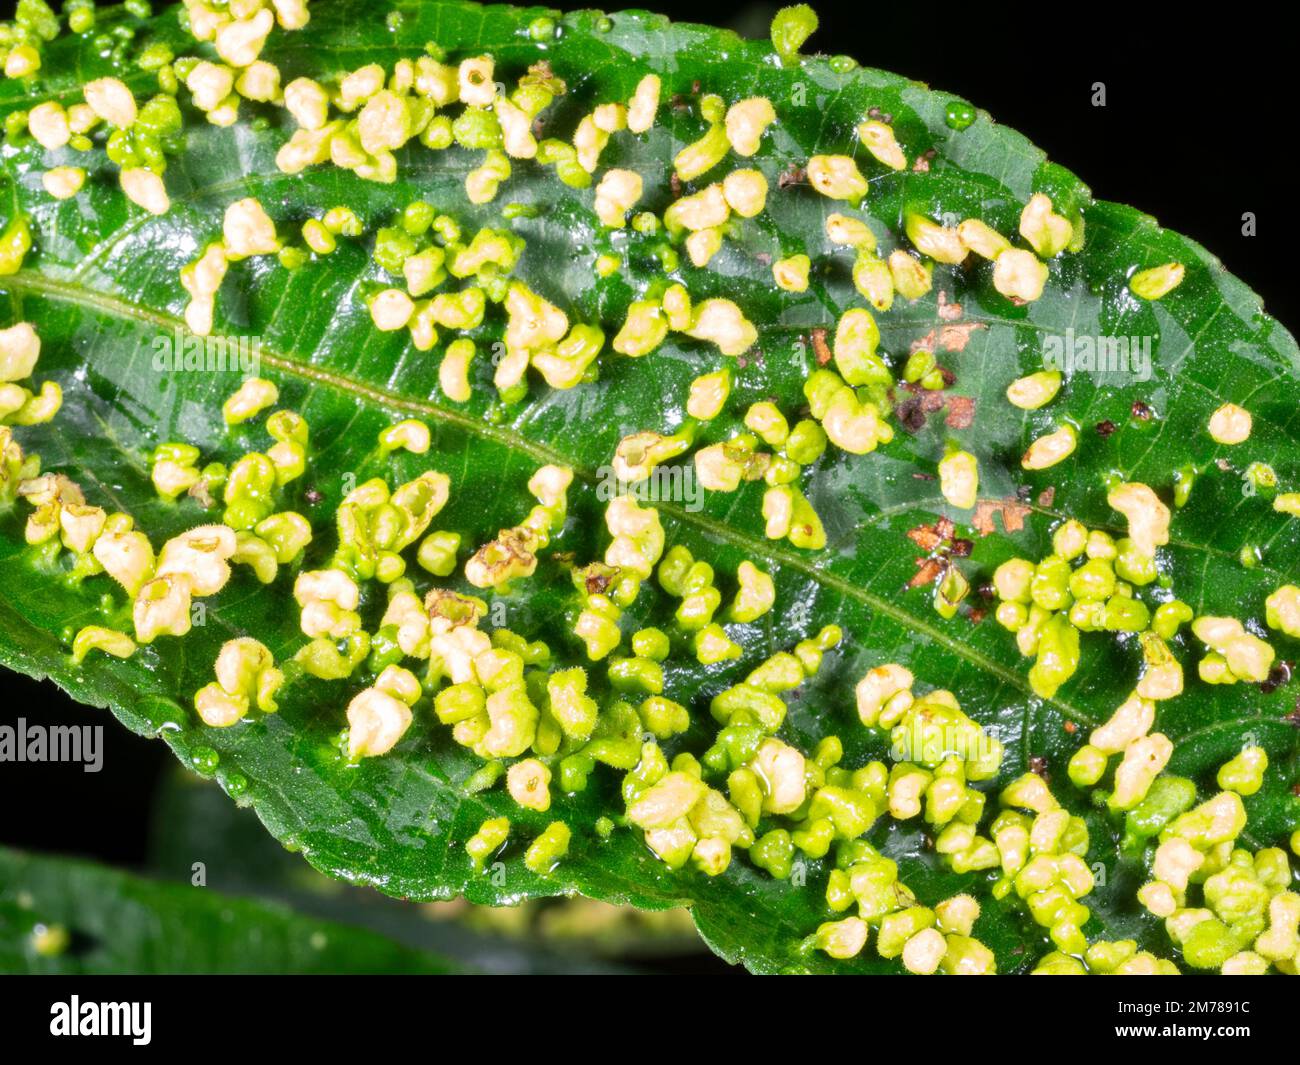 Leaf of an understory shrub covered in galls, resulting from insect, bacterial or fungal attack. Growing in rainforest in Orellana province, Ecuador Stock Photo